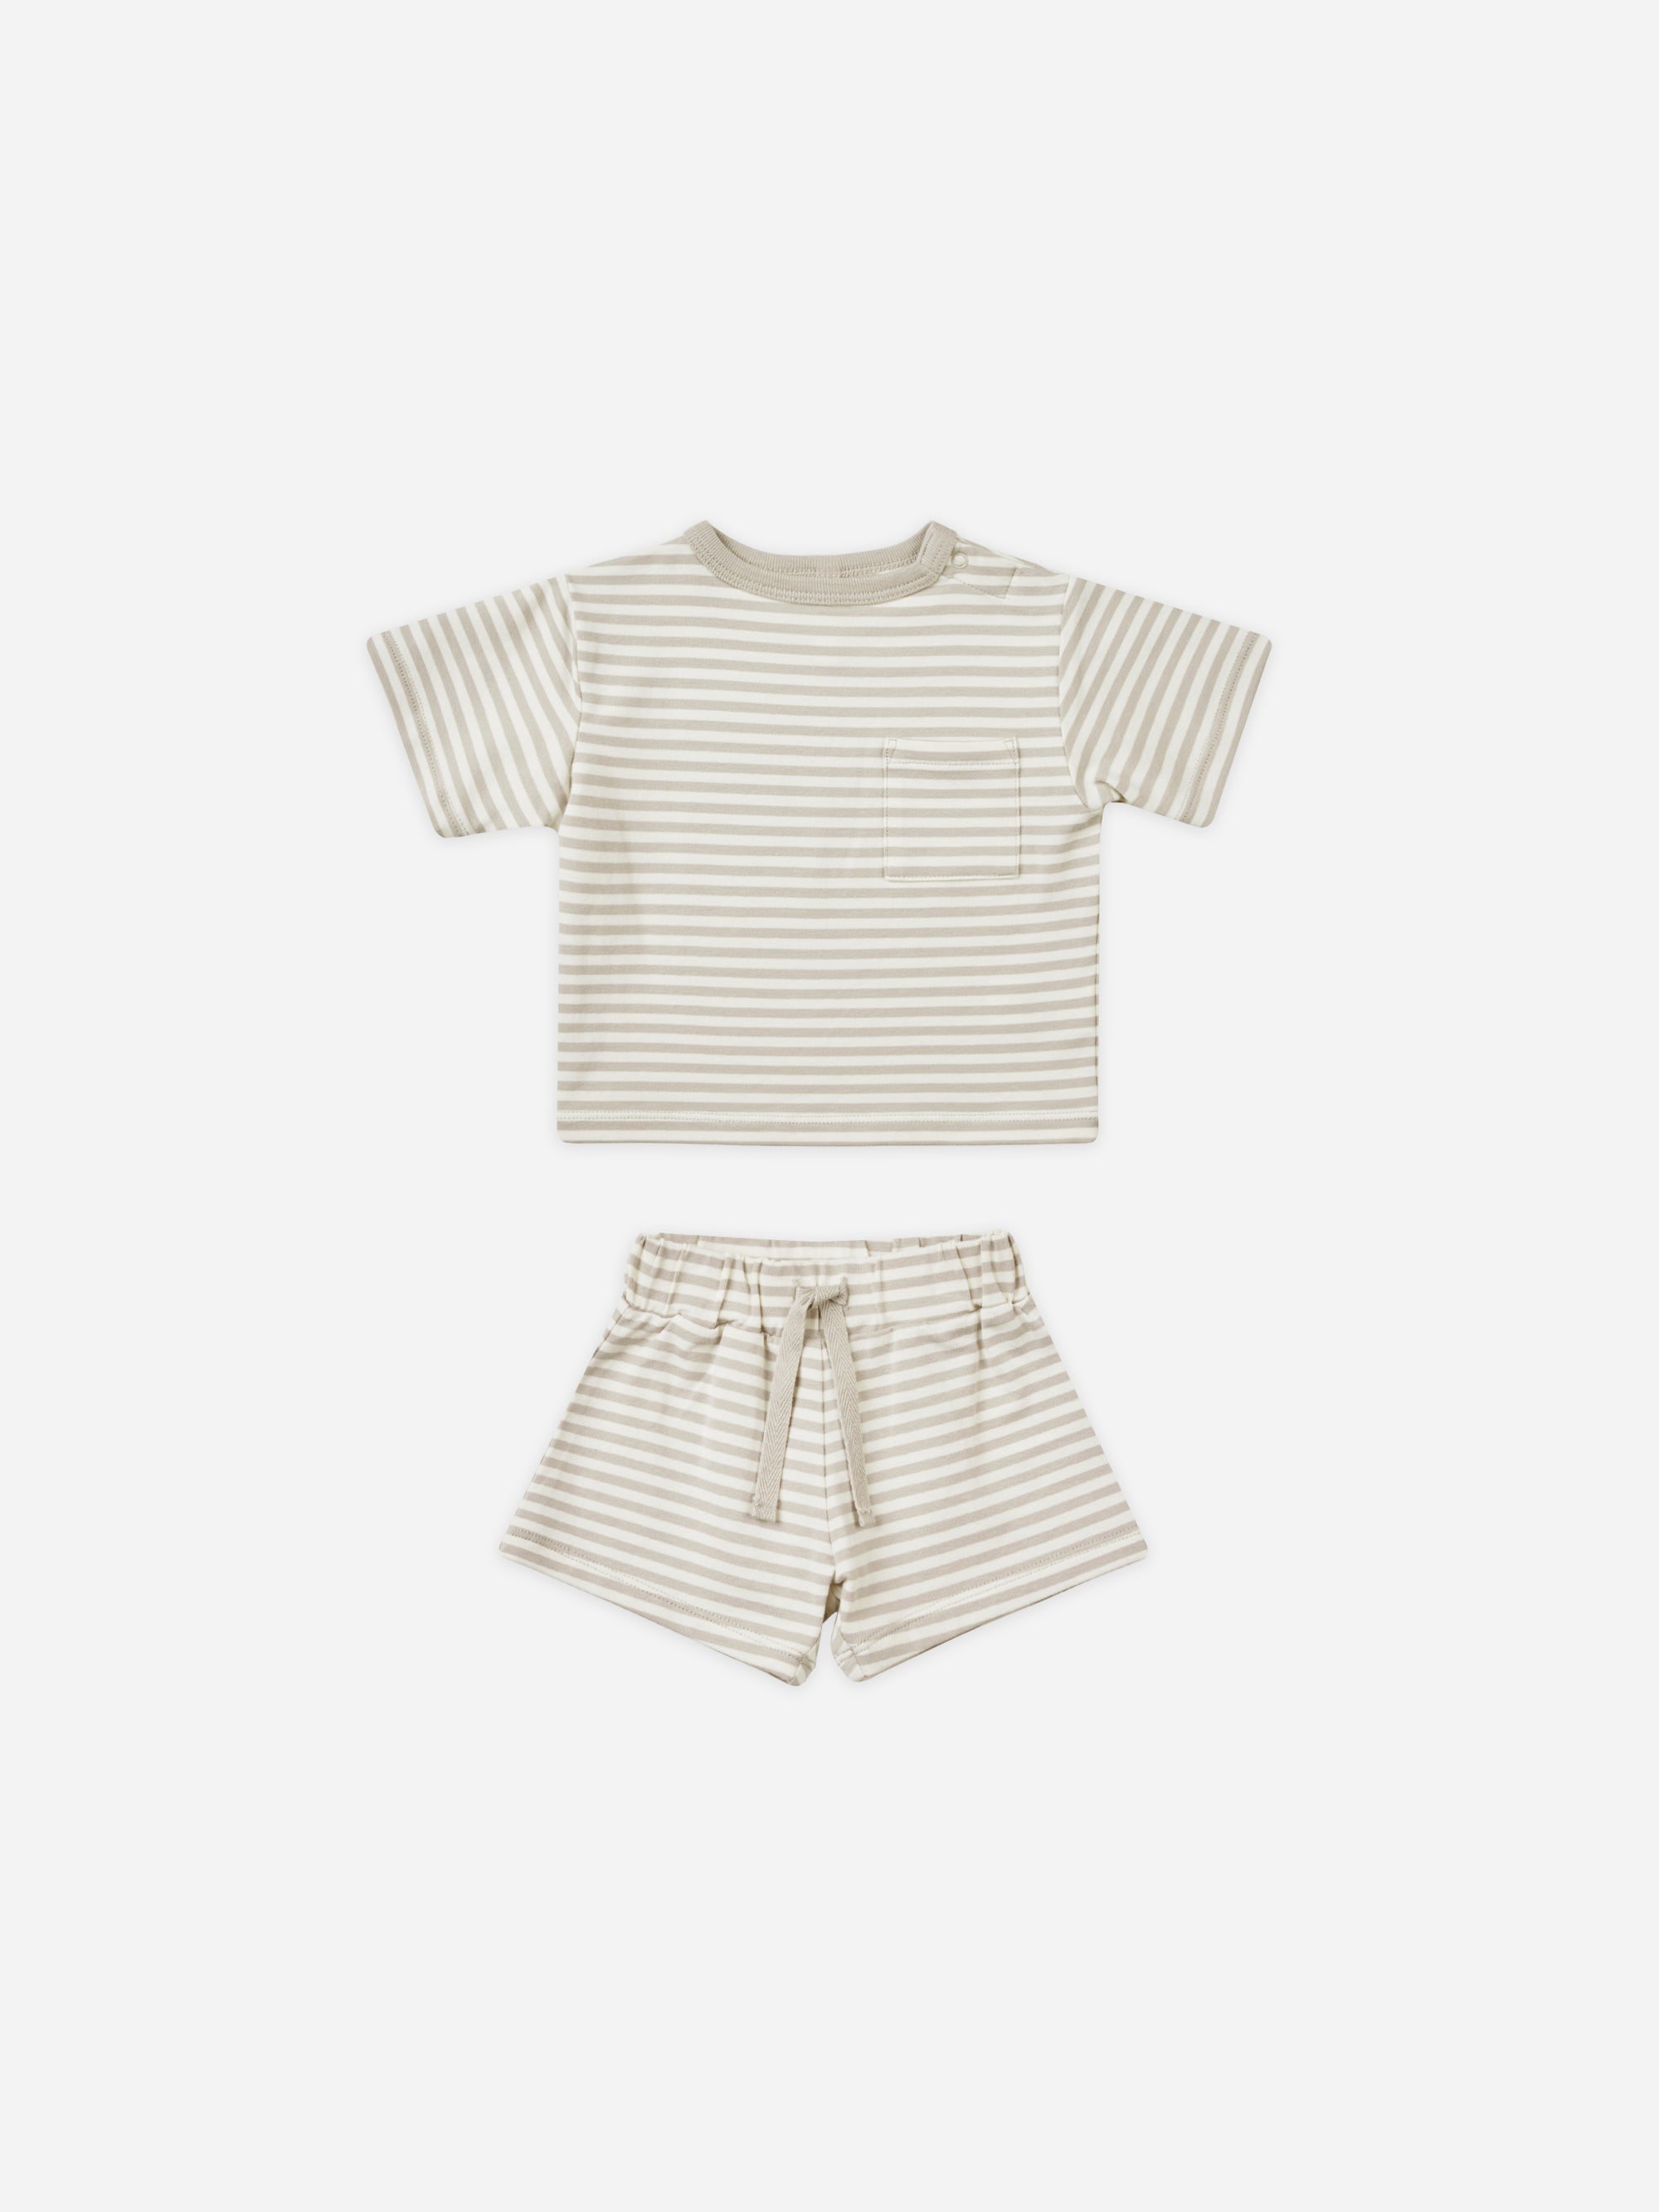 Boxy Pocket Tee + Short Set || Ash Stripe - Rylee + Cru | Kids Clothes | Trendy Baby Clothes | Modern Infant Outfits |